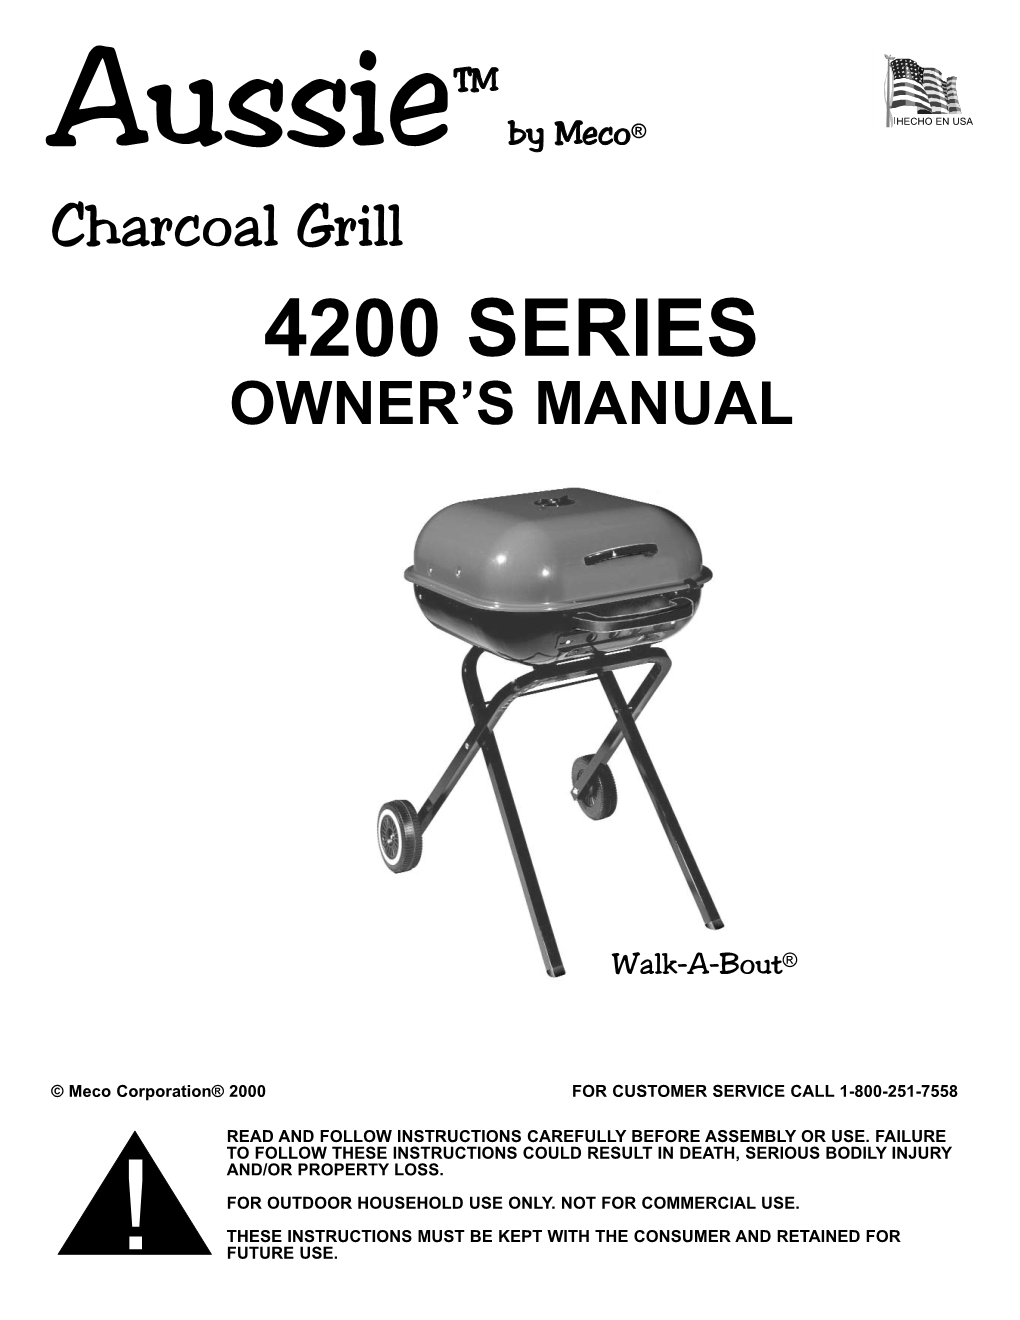 Charcoal Grill 4200 SERIES OWNER’S MANUAL